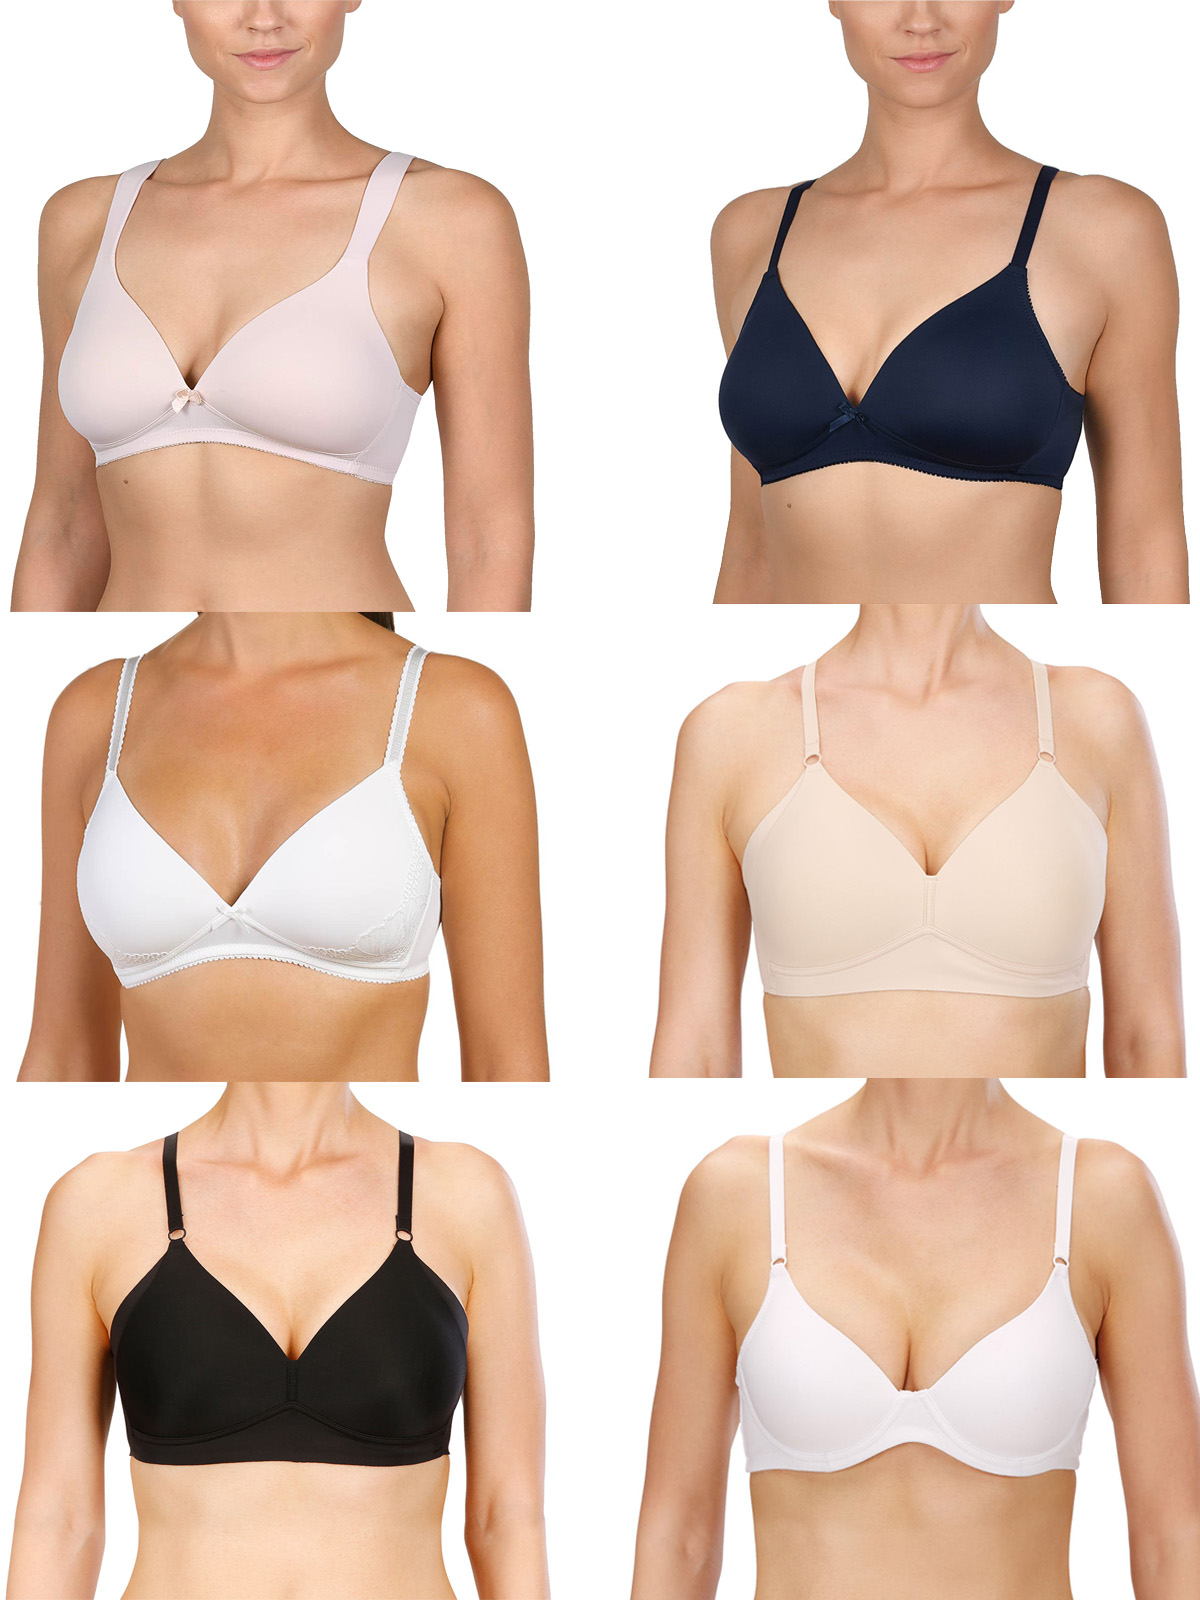 Naturana - - Naturana ASSORTED Non-Wired Bras - Size 34 (B cup)